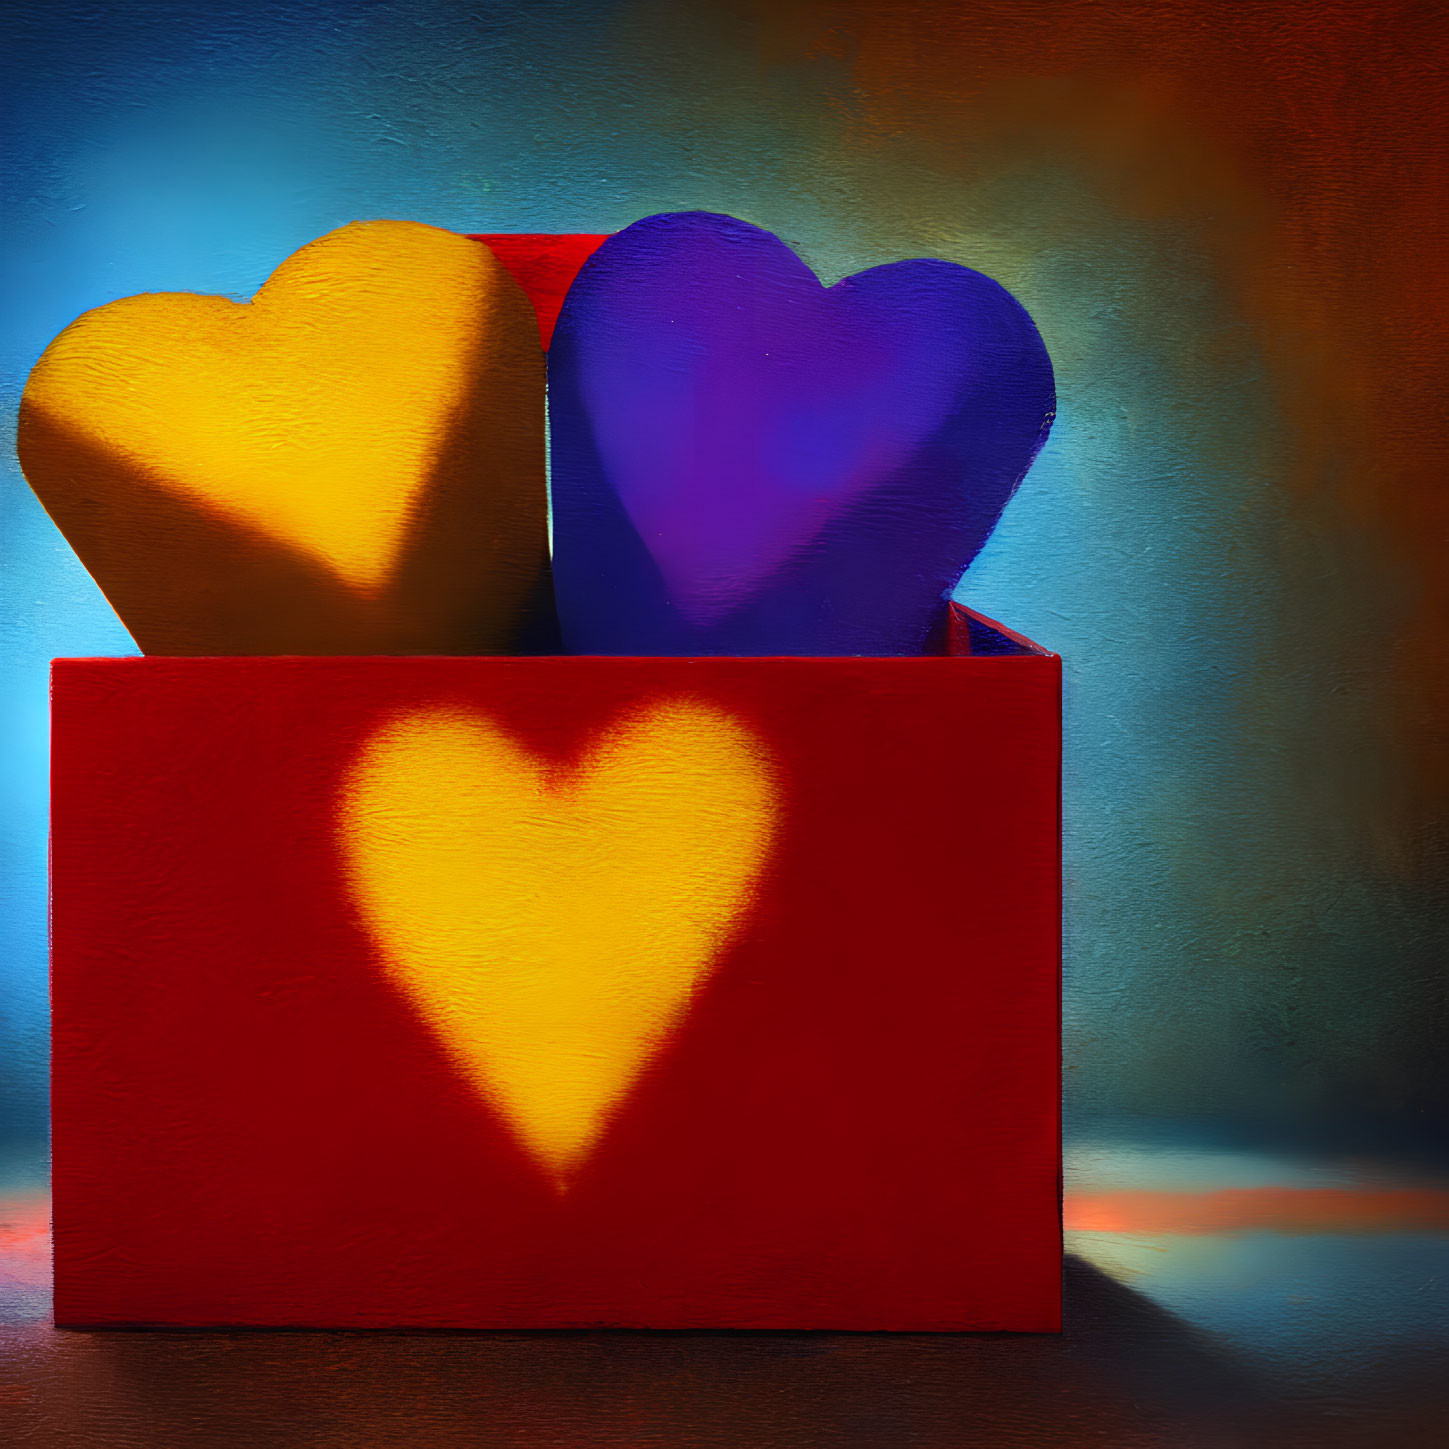 Heart-shaped yellow and blue objects in red box with heart-shaped shadow